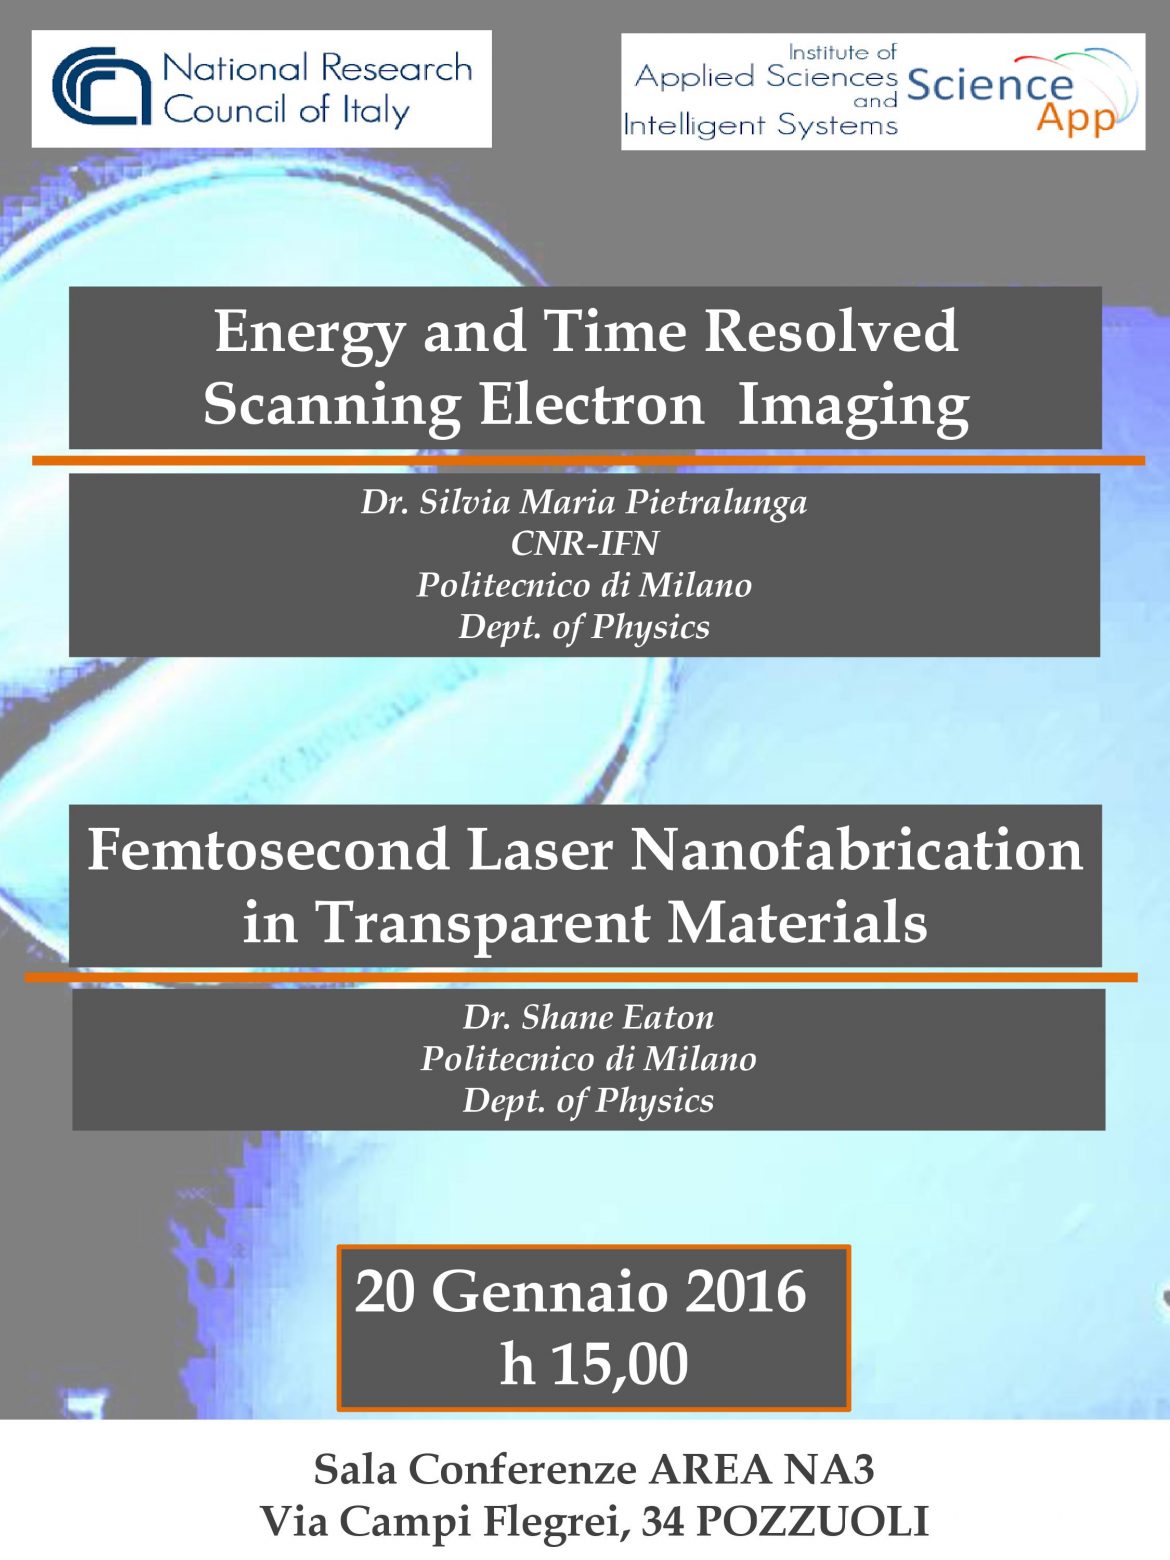 Workshop: Energy and Time Resolved Scanning Electron Imaging & Femtosecond Laser Nanofabrication in Trasparent Materials